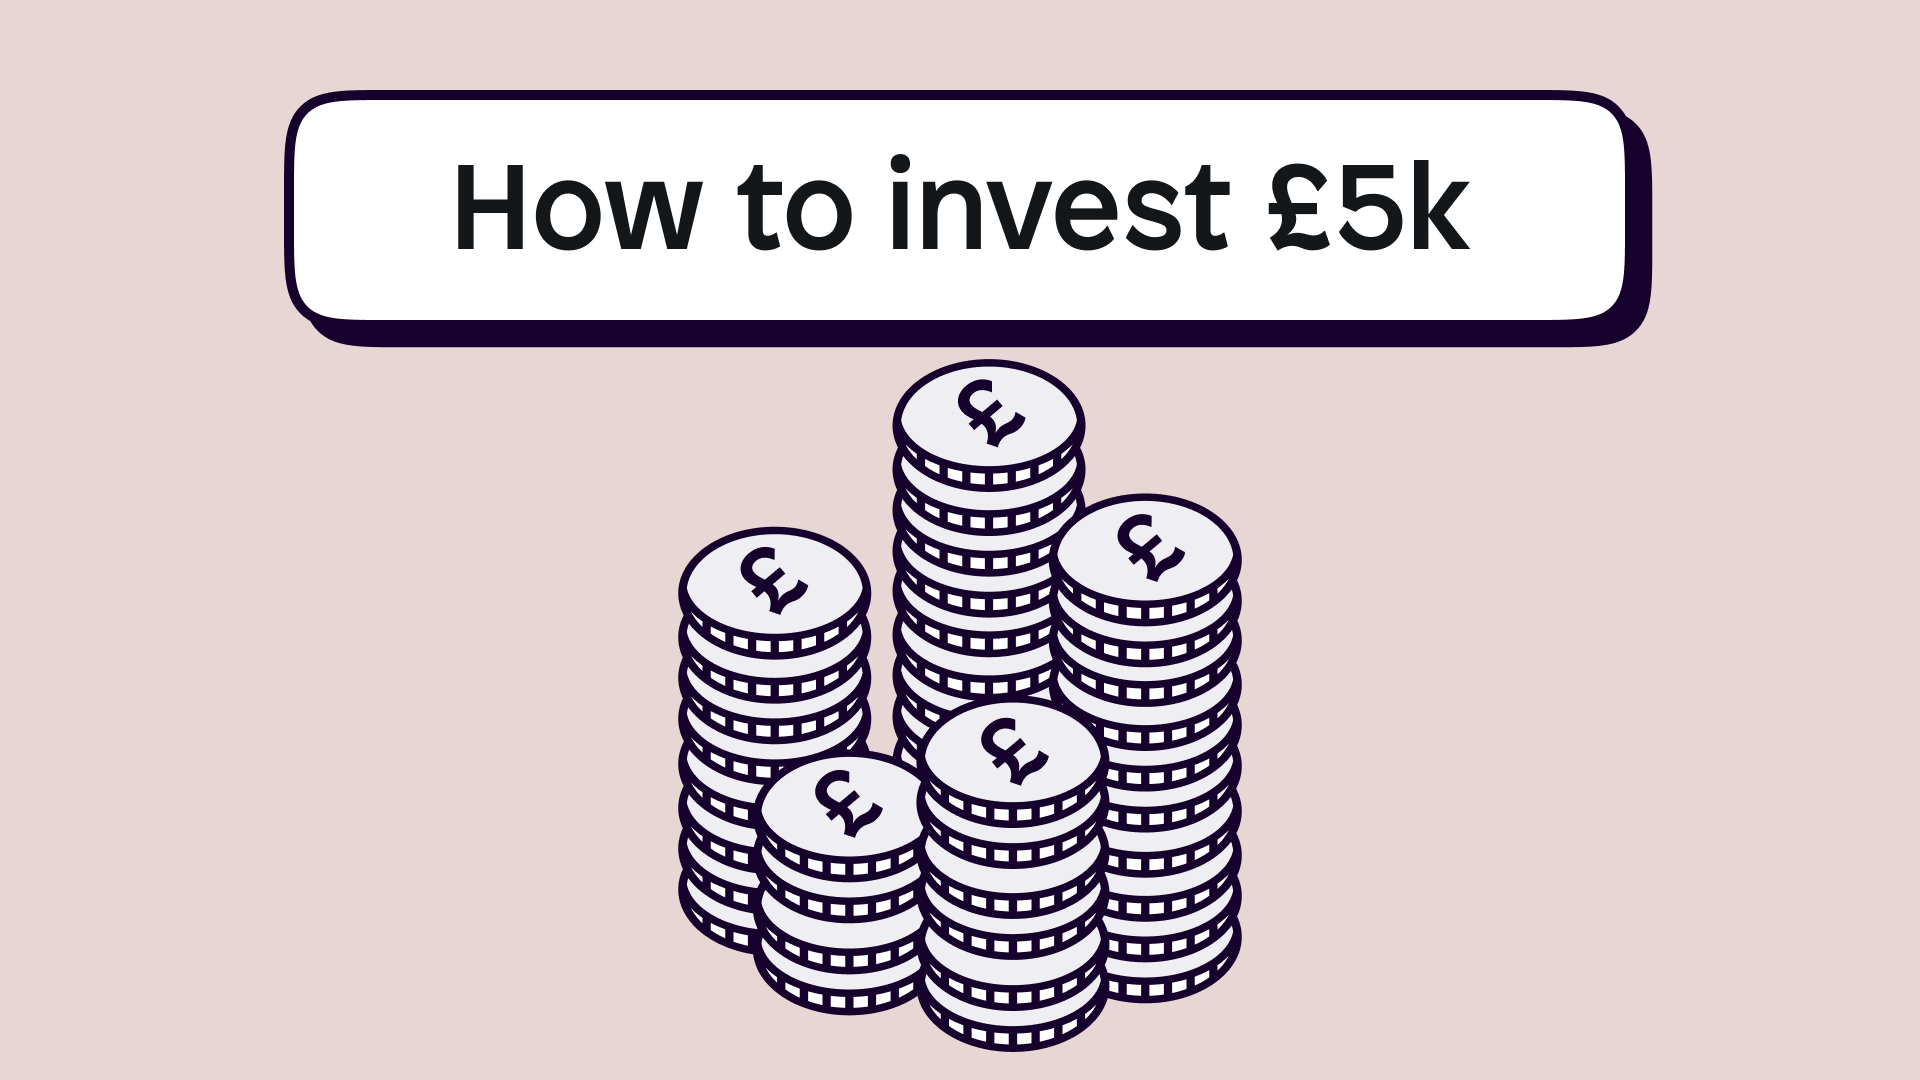 Stacks of pound coins with the title how to invest £5k